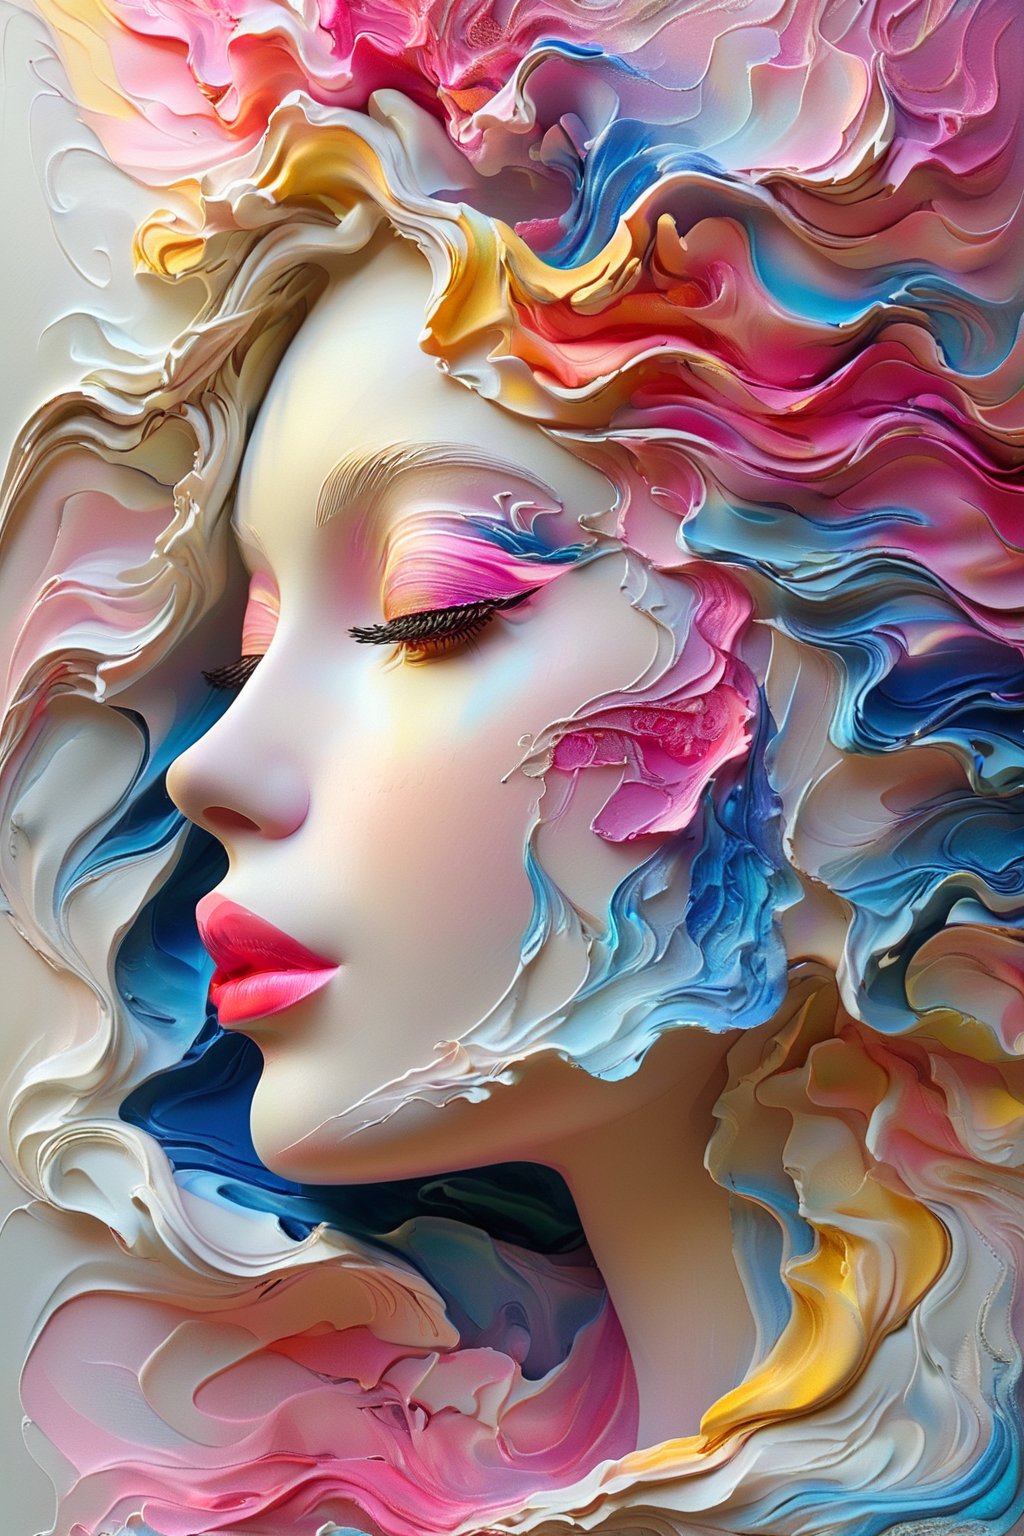 A side profile of a human face, intricately intertwined with flowing, abstract patterns in vibrant hues of blue, pink, yellow, and white. The face appears to be melting or morphing into the surrounding colors, creating an ethereal and dreamlike effect. The details of the face, such as the eyes, nose, and lips, are clearly visible, contrasting with the fluidity of the surrounding elements.,SDXL,SDXLTurbo